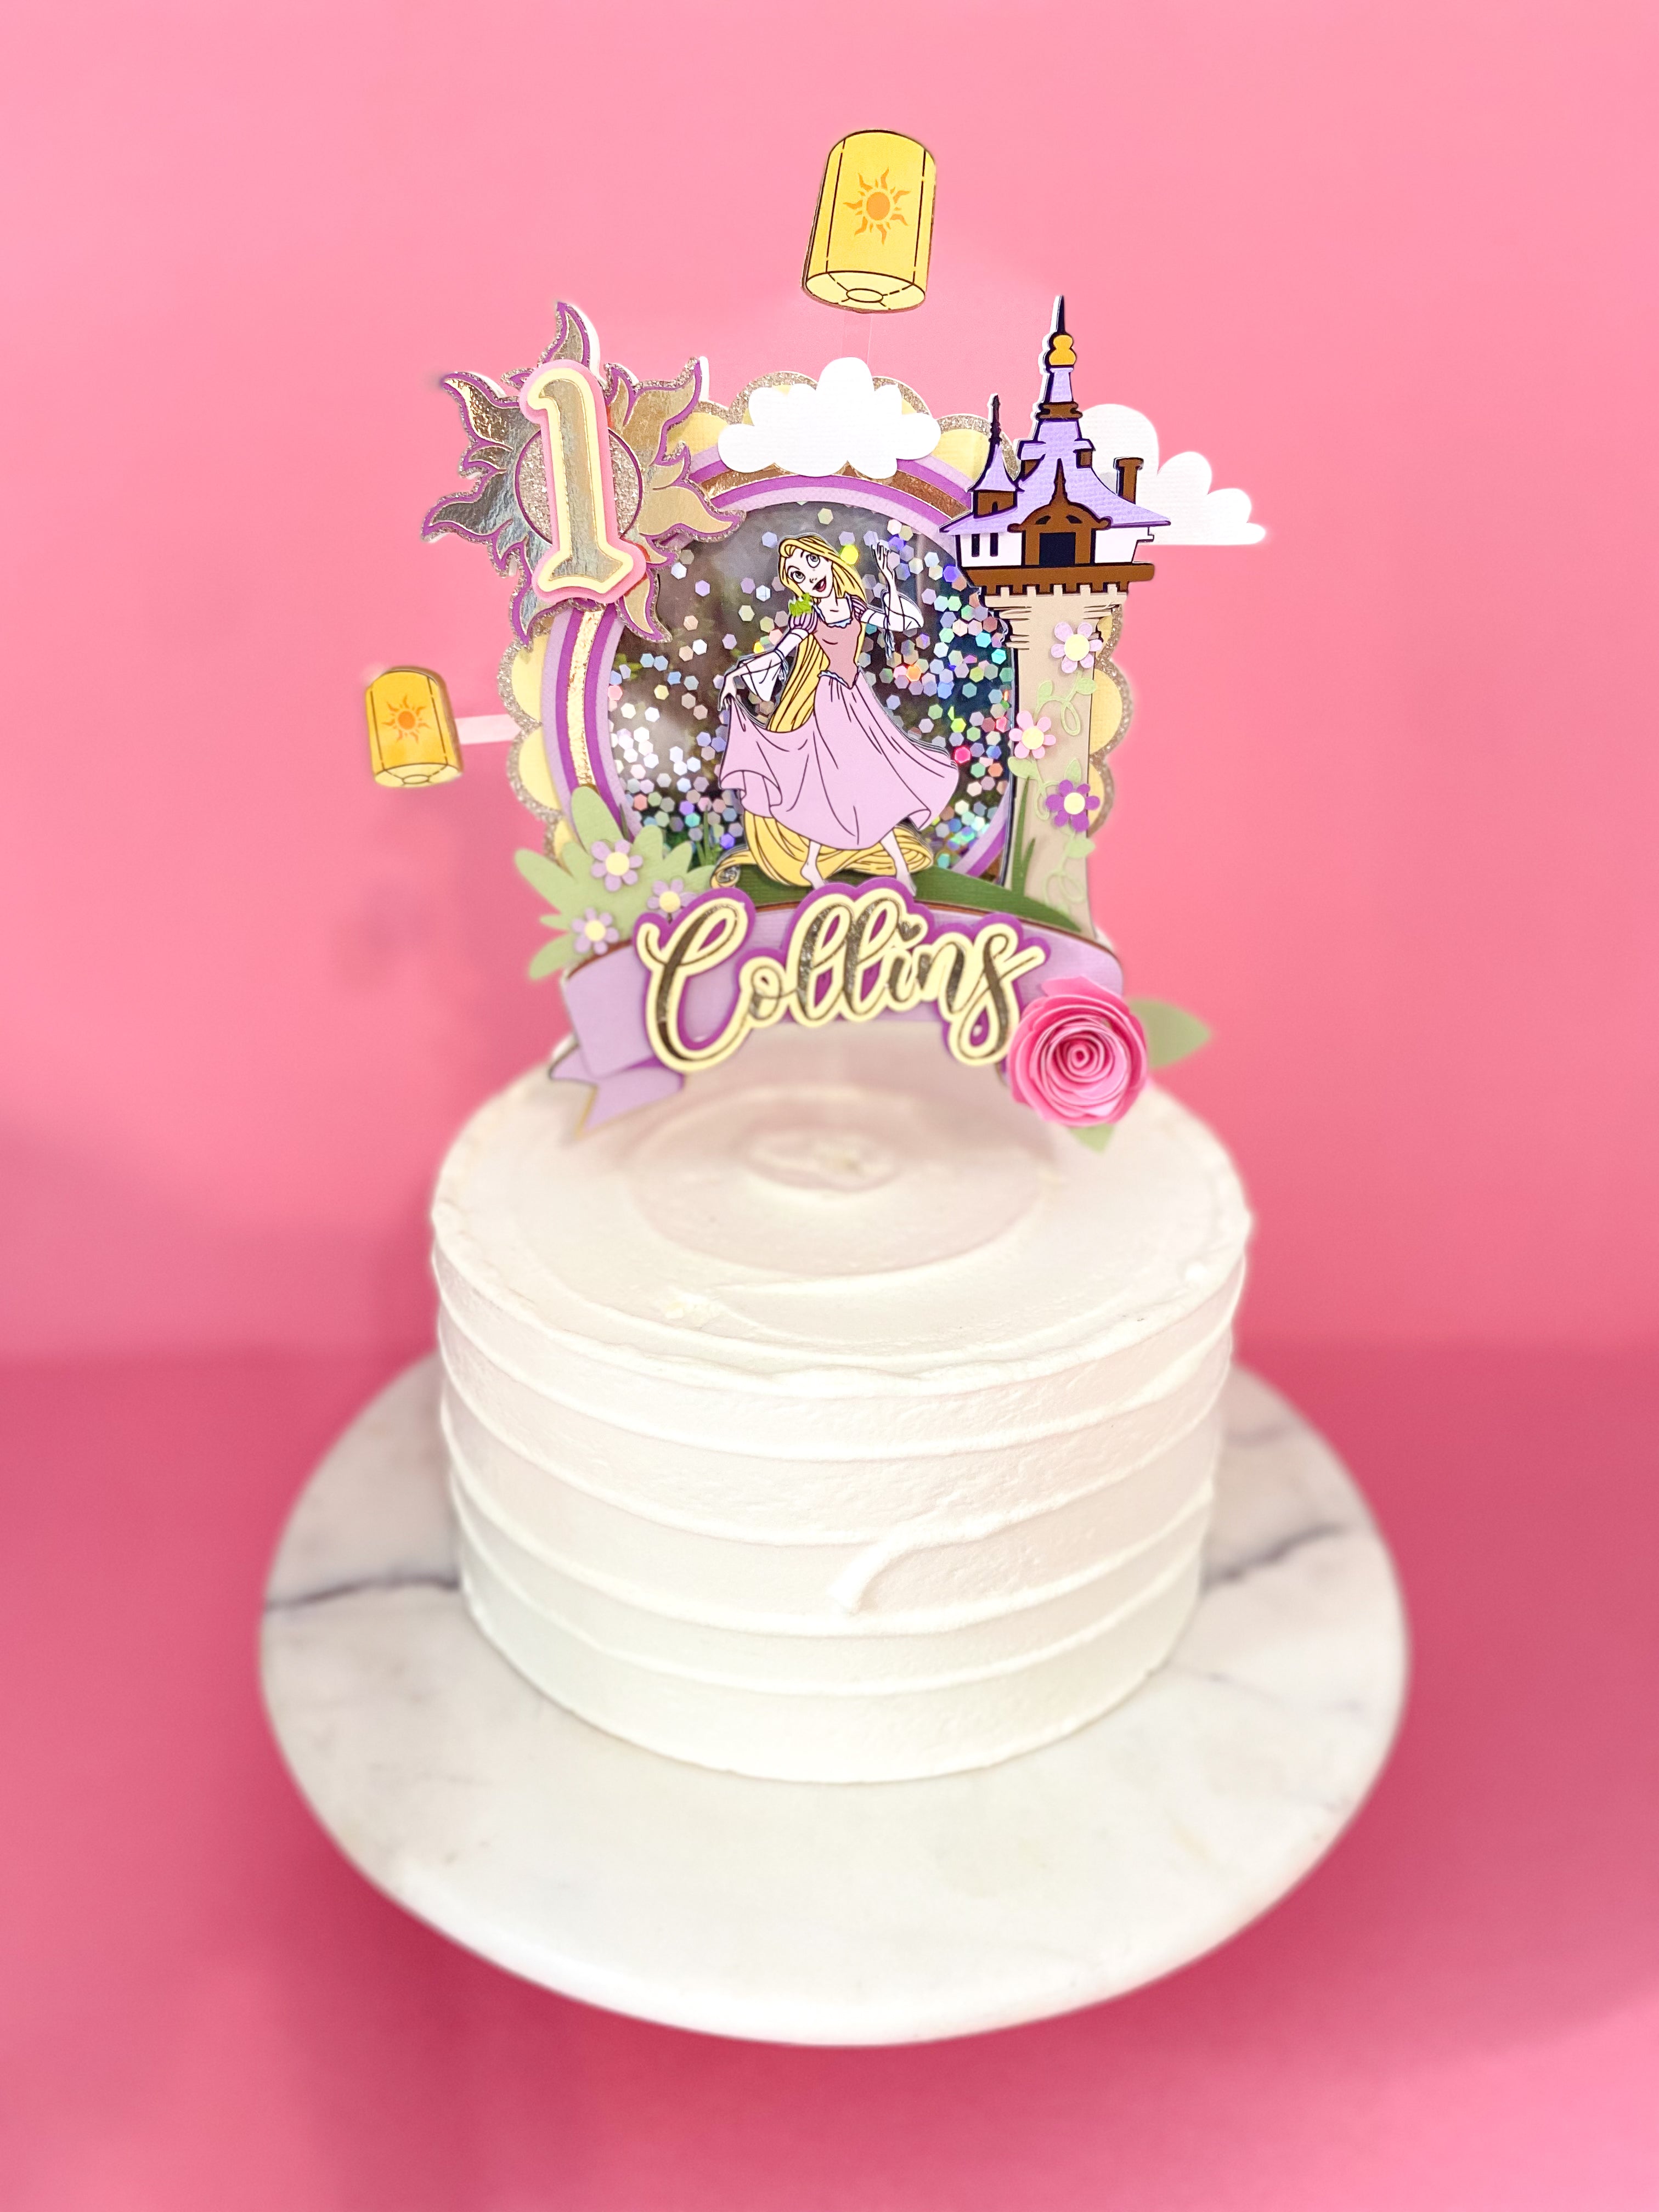 Rapunzel Free Printable Cake Toppers. | Oh My Fiesta! in english | Rapunzel,  Rapunzel cake topper, Rapunzel cake